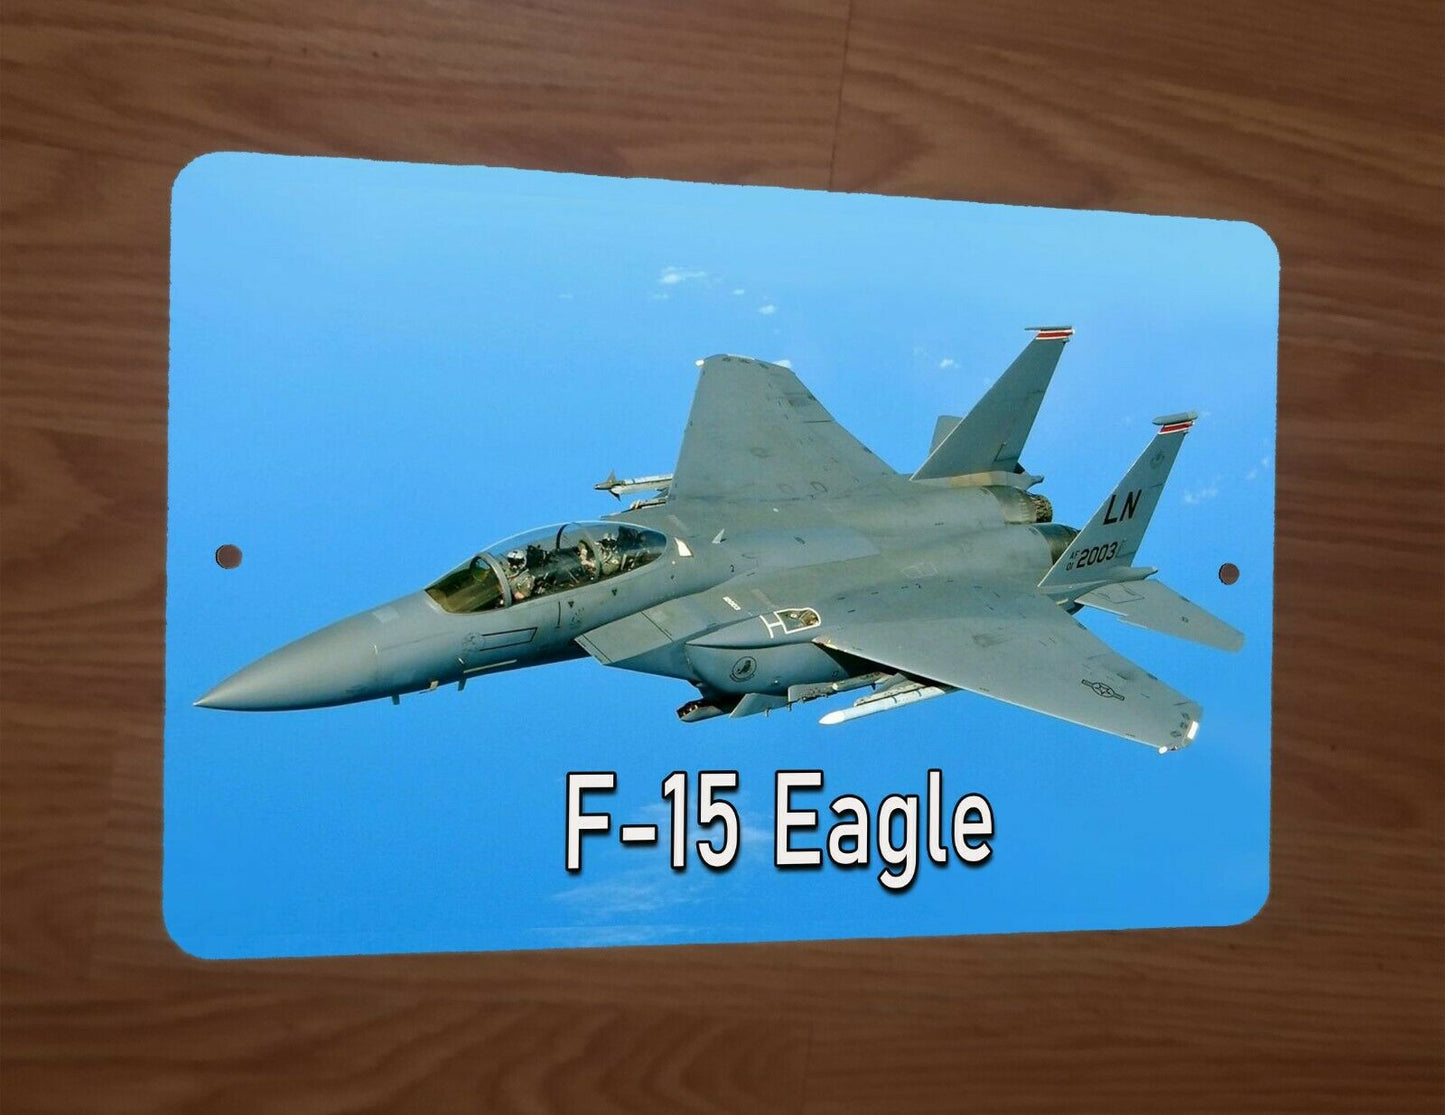 F-15 Eagle US Air Force McDonnell Douglas Jet Fighter Airplane 8x12 Metal Sign Military